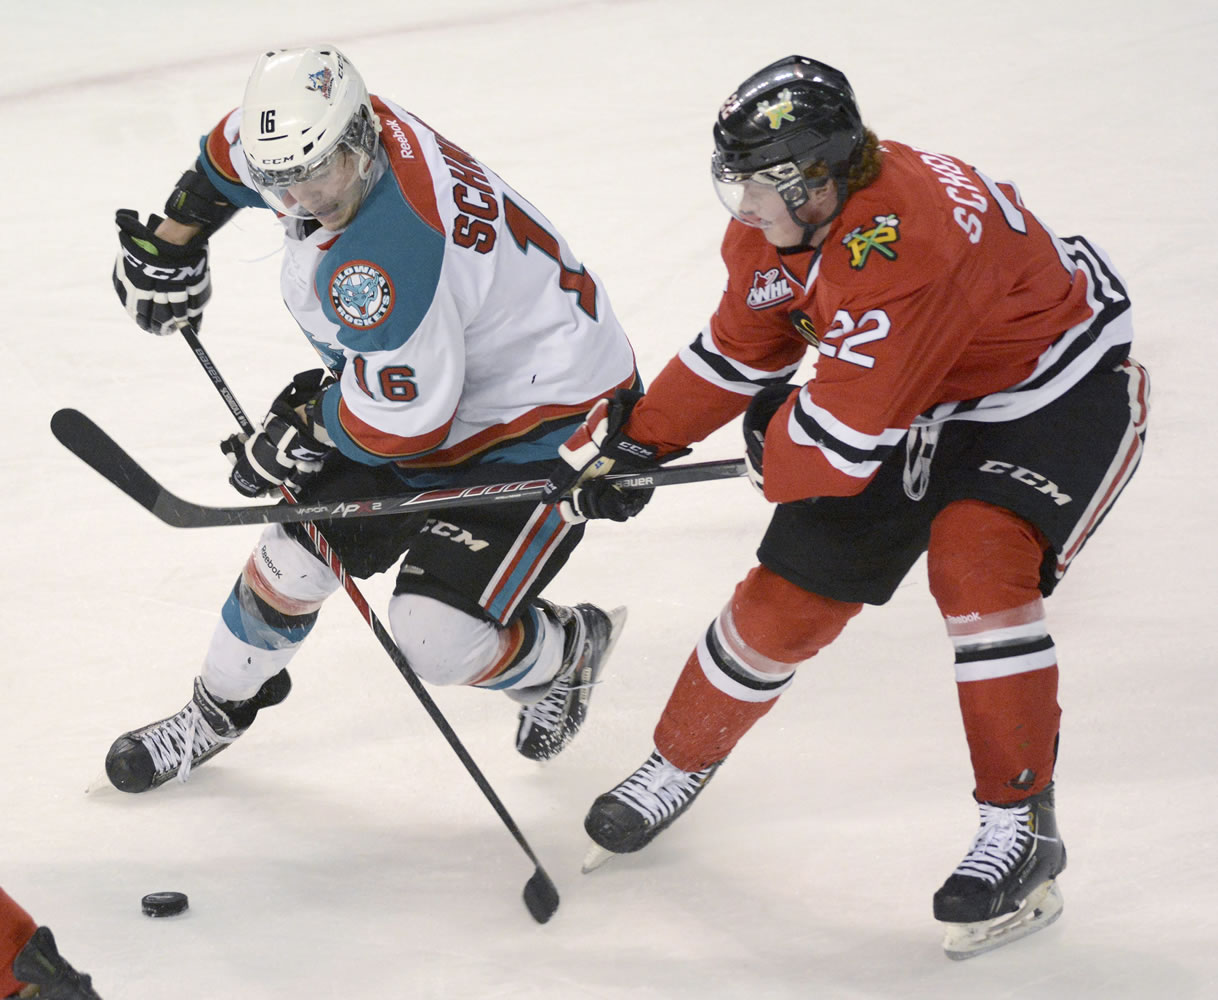 Kelowna Rockets Kris Schmidli, battles for the puck along with Portland Winterhawks, Alex Schoenborn during WHL playoff action at Prospera Place on Friday evening.